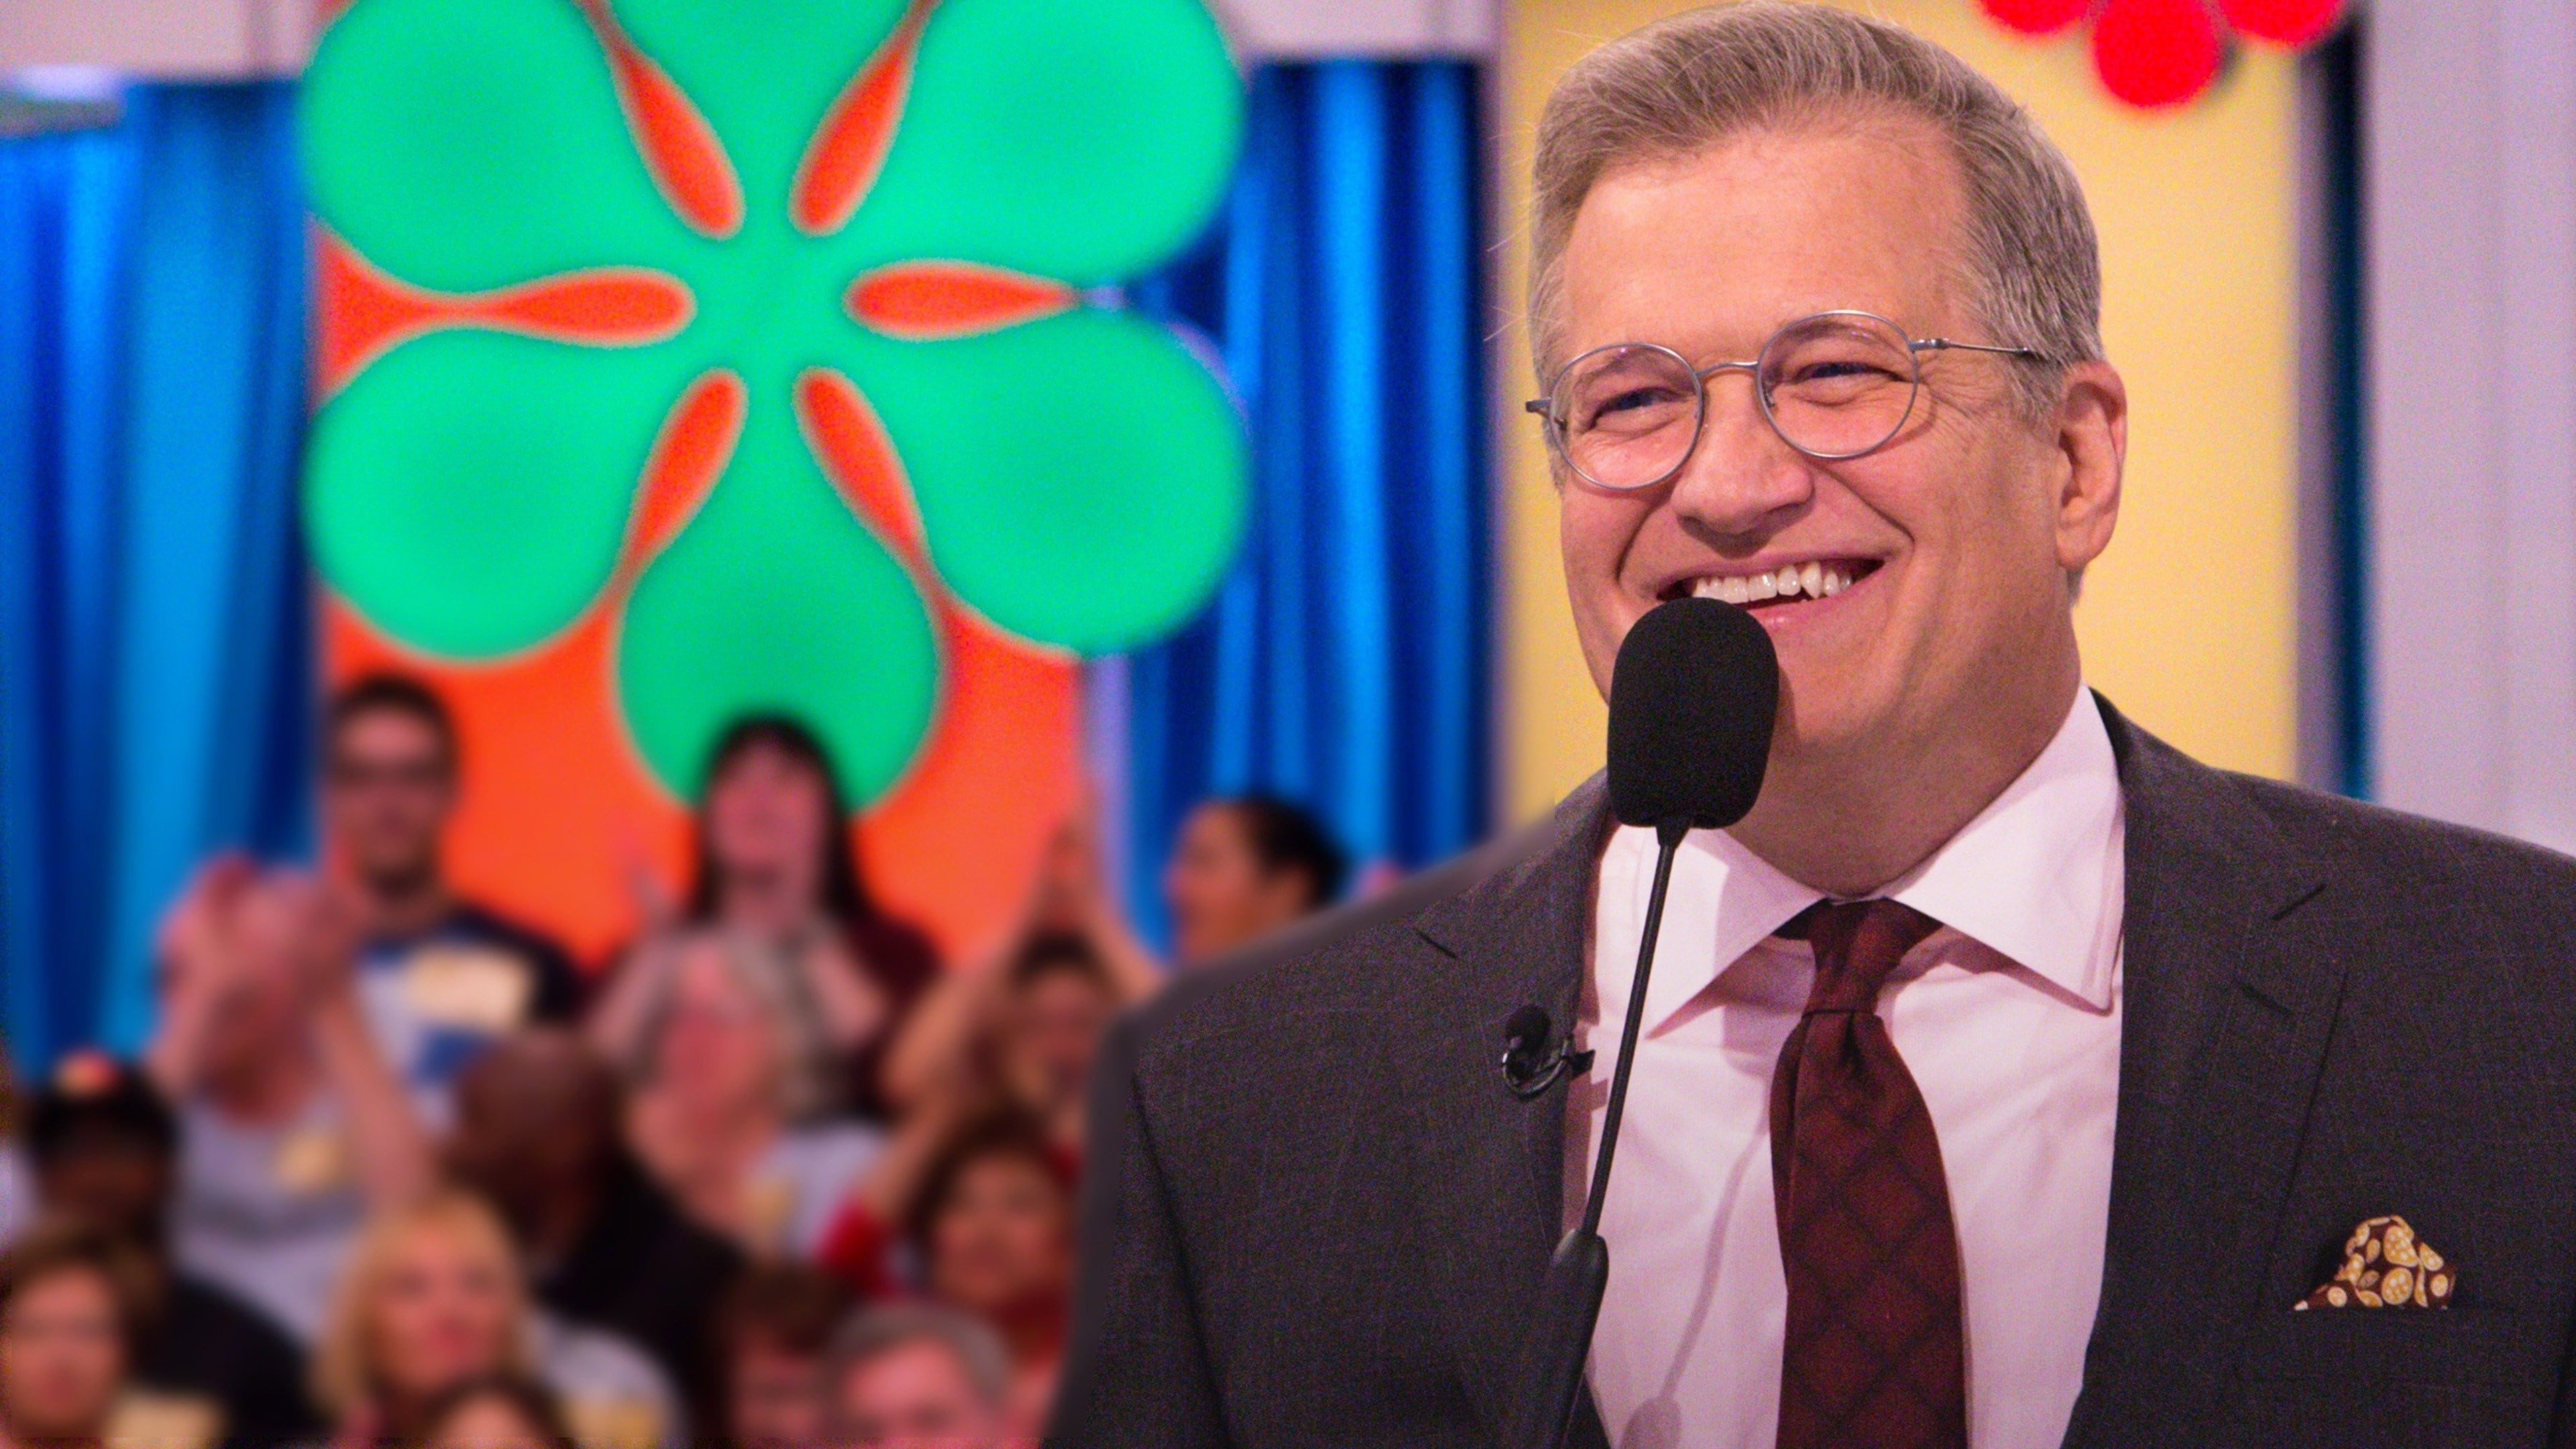 The Price Is Right - Season 5 Episode 124 : The Price Is Right Season 5 Episode 124